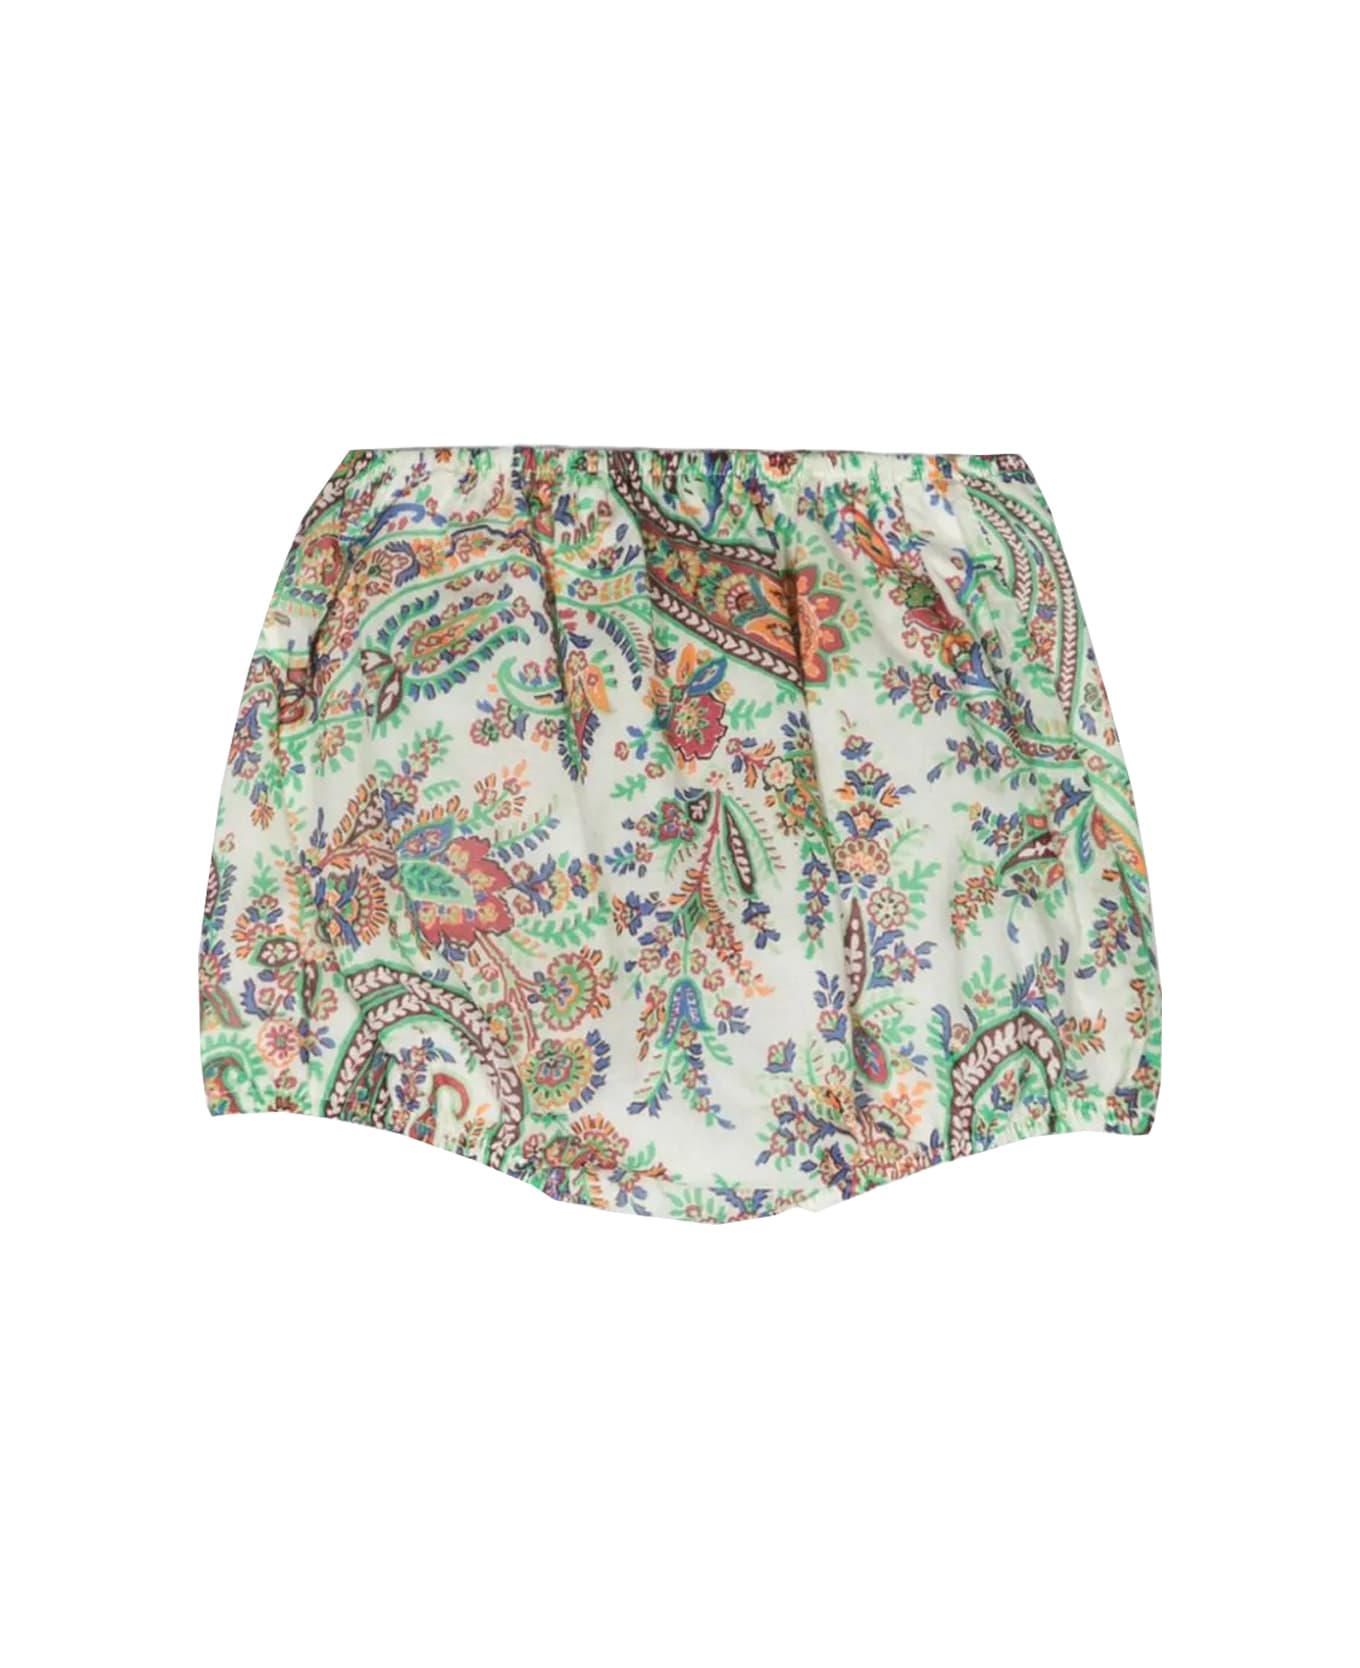 Etro Floral Paisley Shorts - Multicolor ボトムス